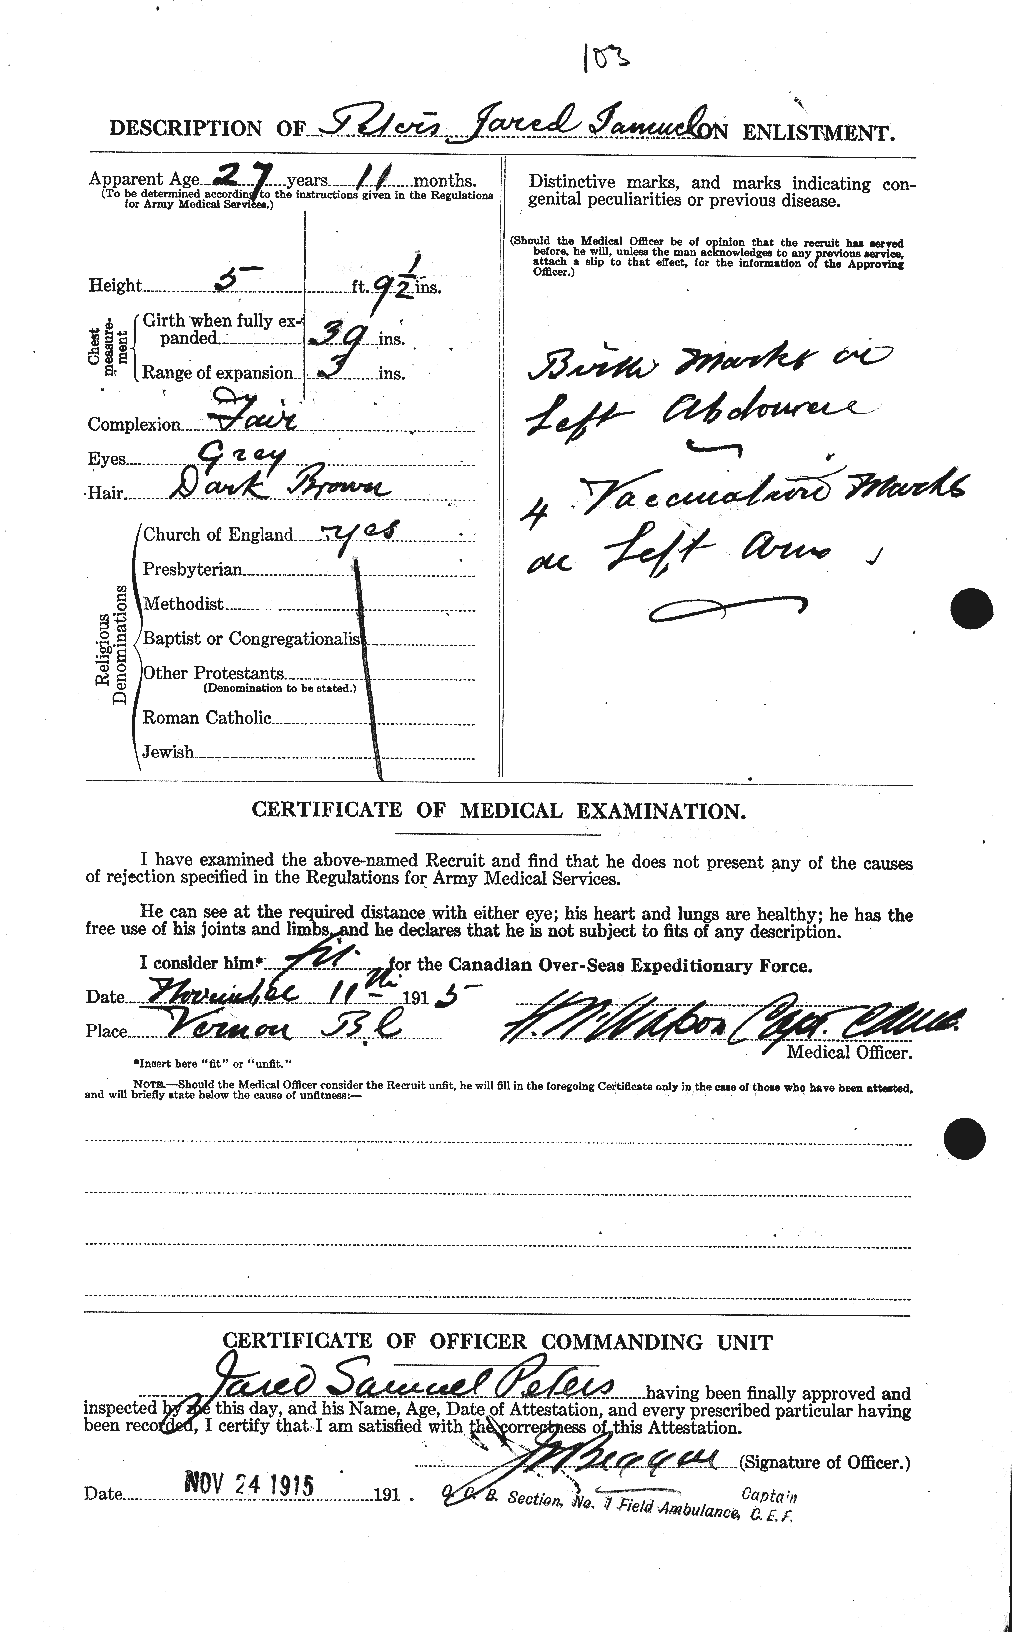 Personnel Records of the First World War - CEF 575531b